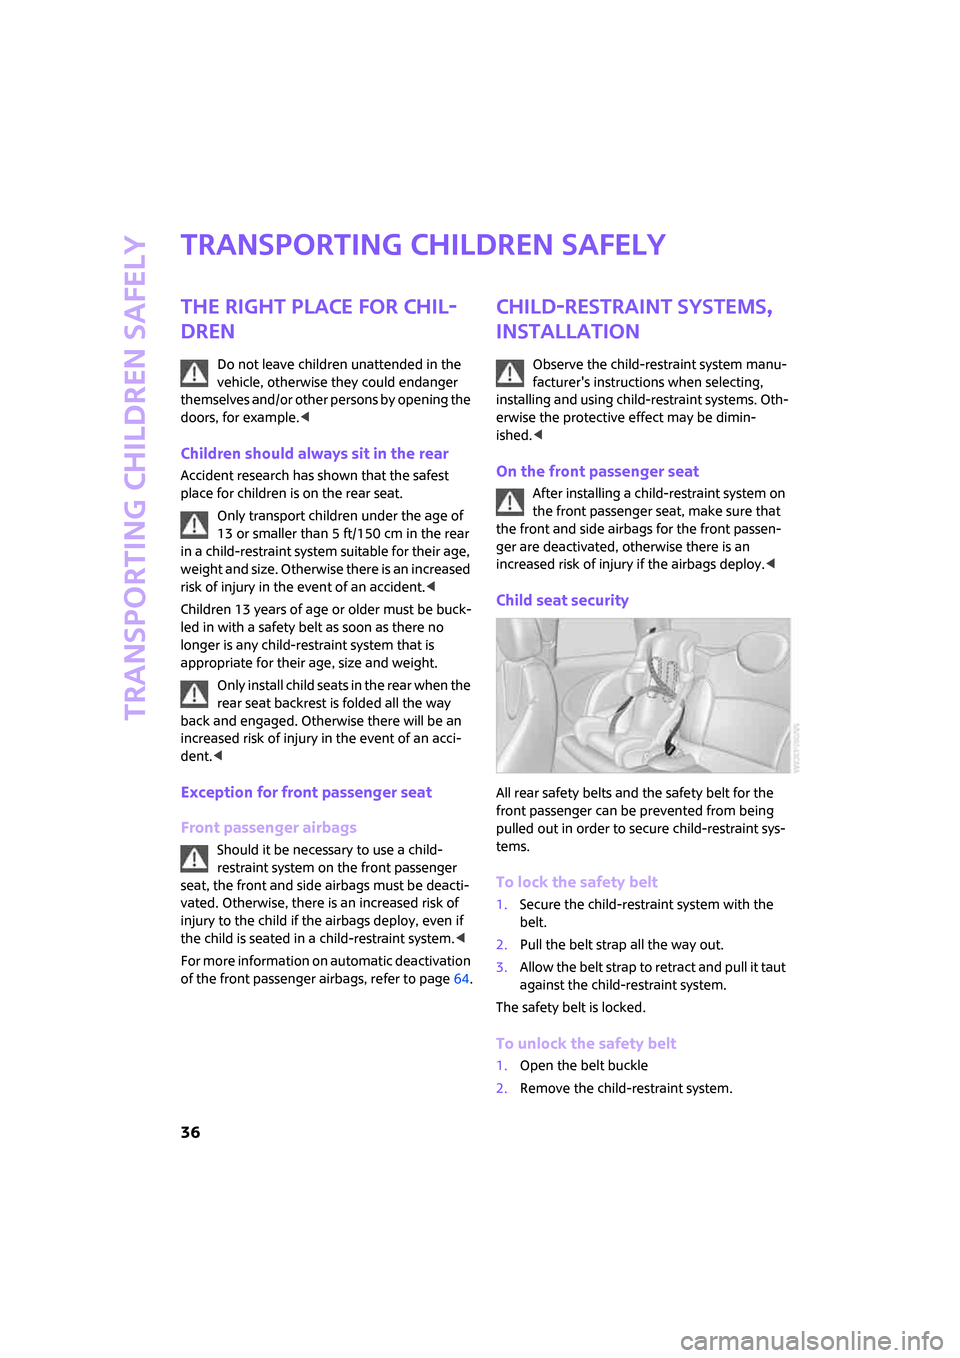 MINI Clubman 2008 User Guide Transporting children safely
36
Transporting children safely
The right place for chil-
dren
Do not leave children unattended in the 
vehicle, otherwise they could endanger 
themselves and/or other per